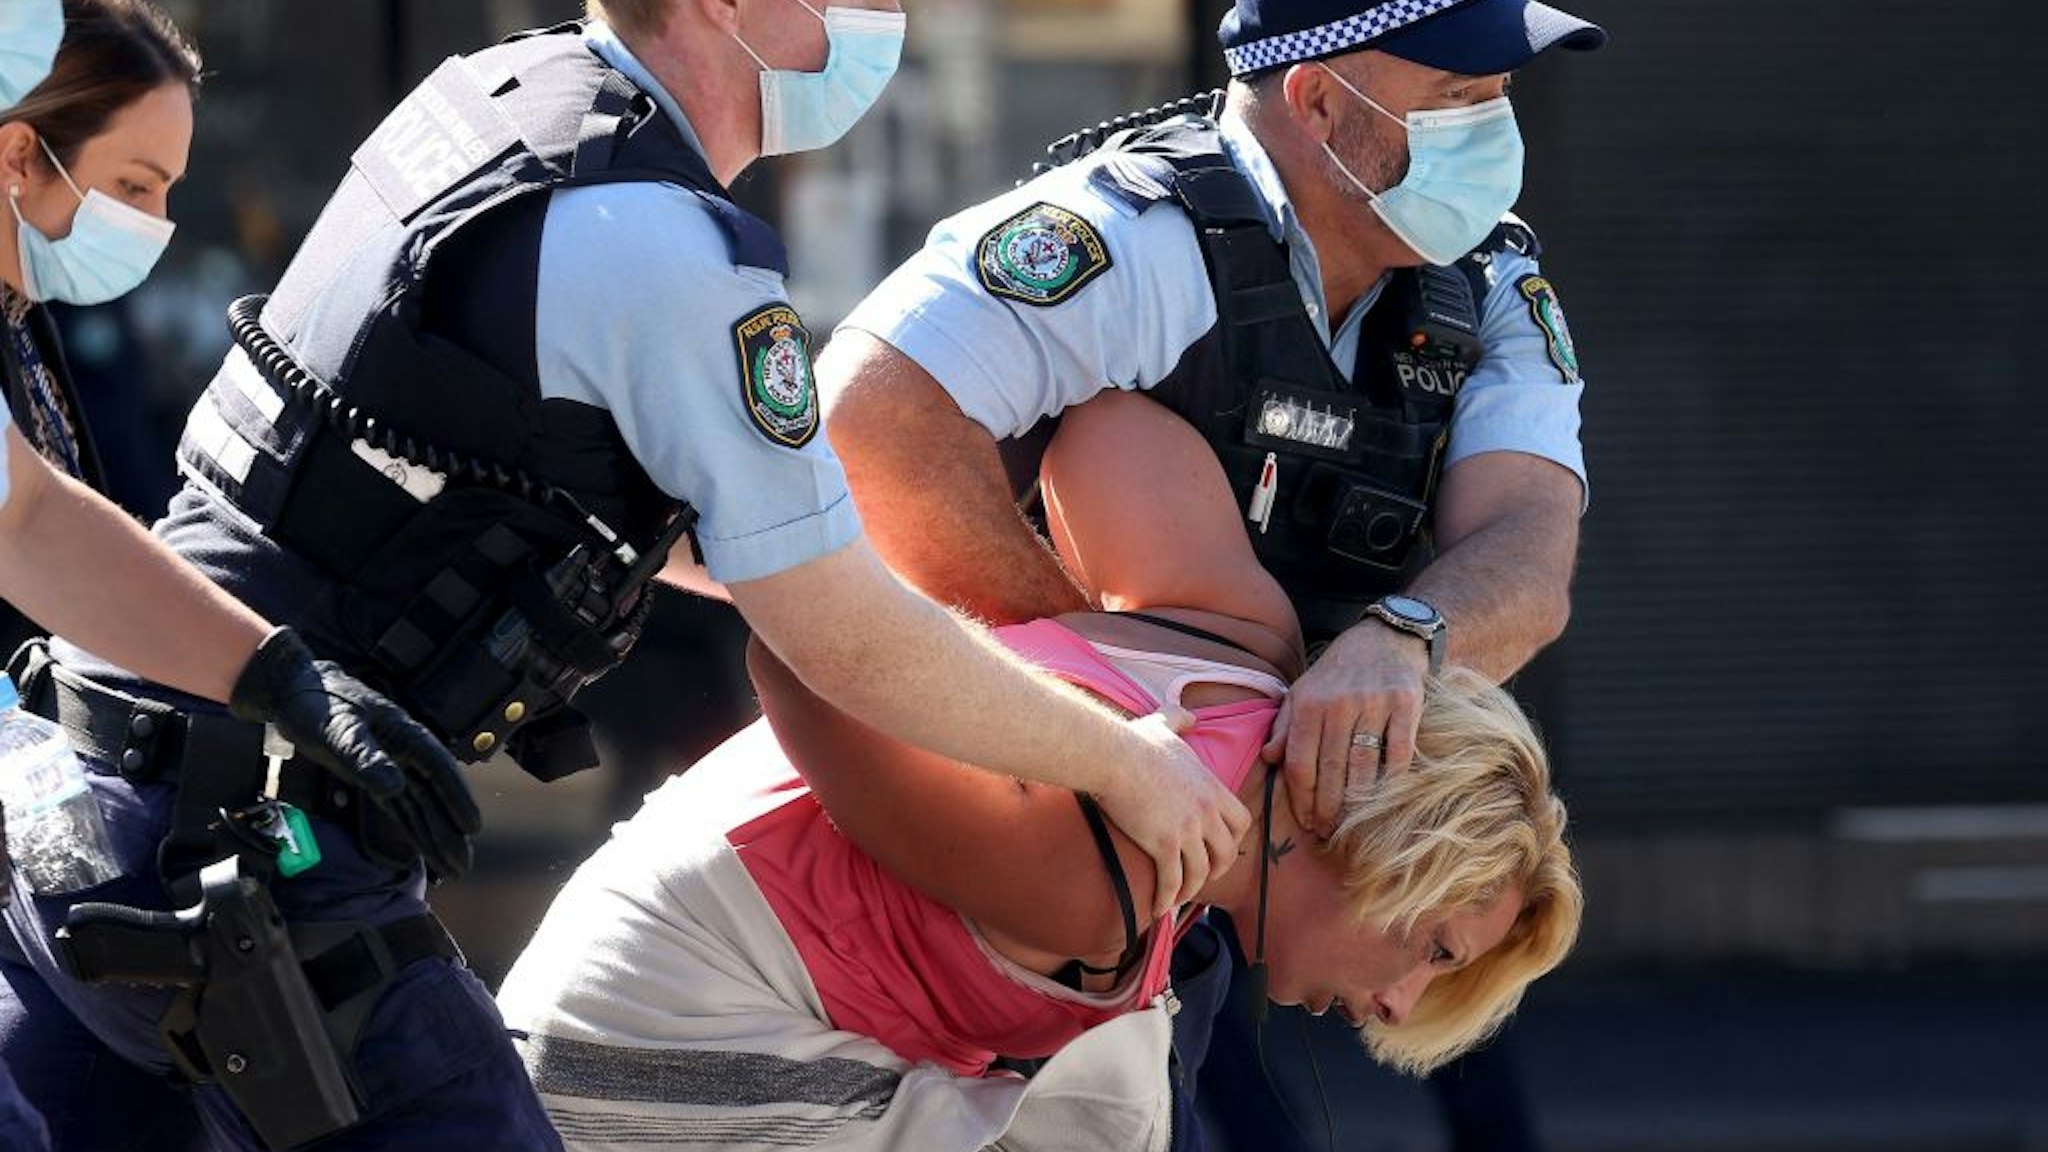 Police officers detain a protestor in Sydney on August 21, 2021, following calls for an anti-lockdown protest rally amid a fast-spreading coronavirus outbreak.